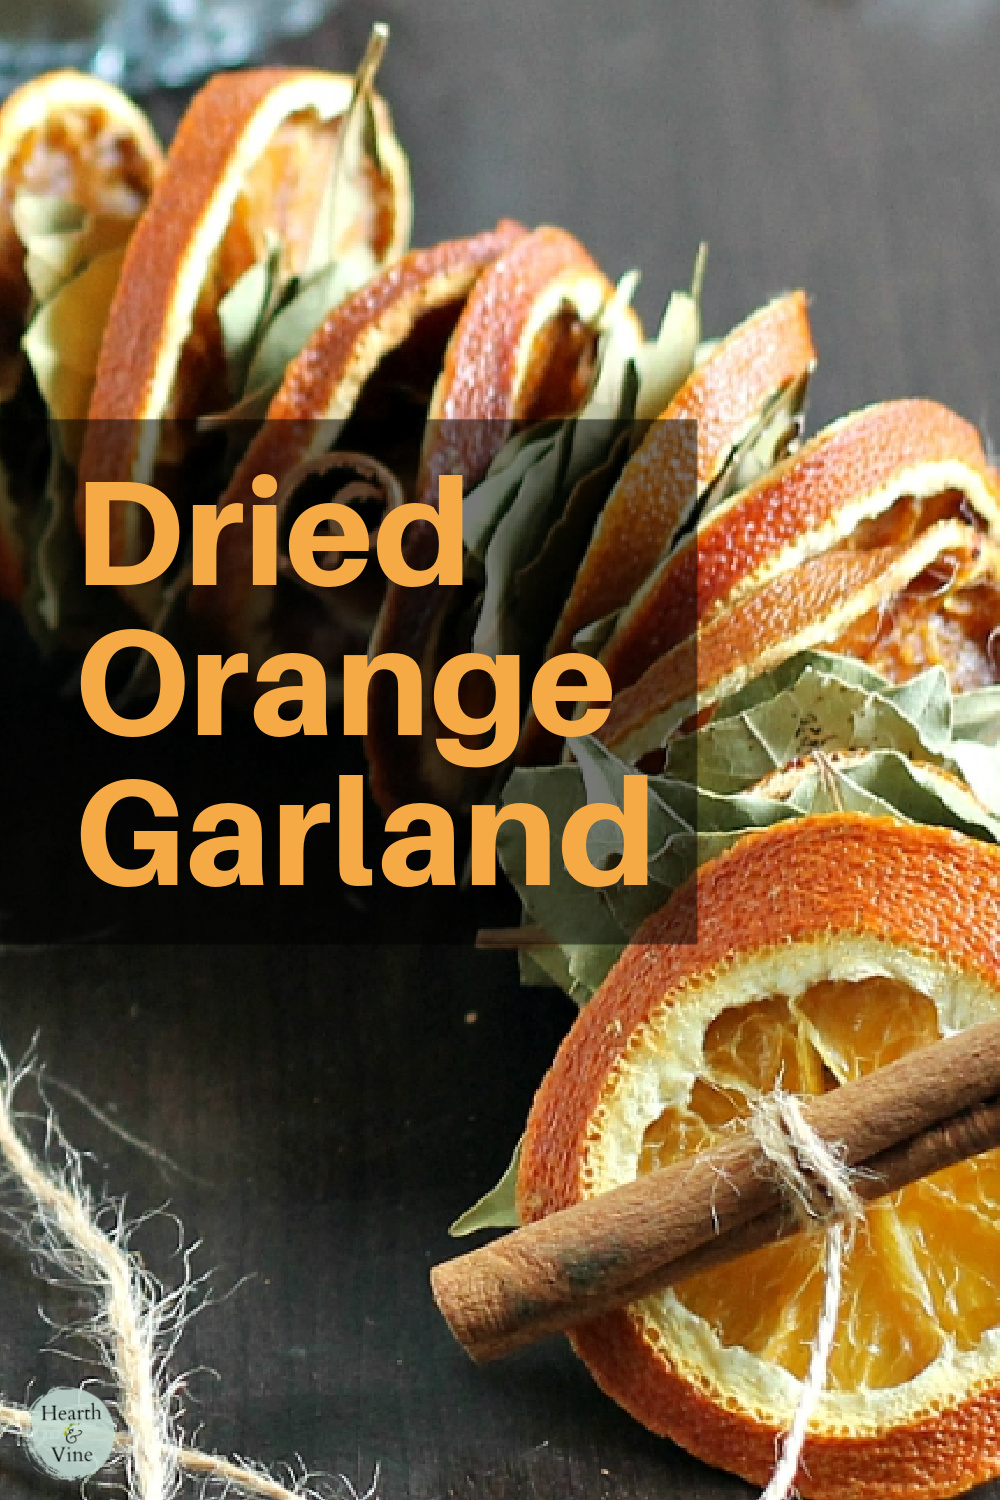 Garland of dried orange slices, bay leaves and cinnamon sticks.